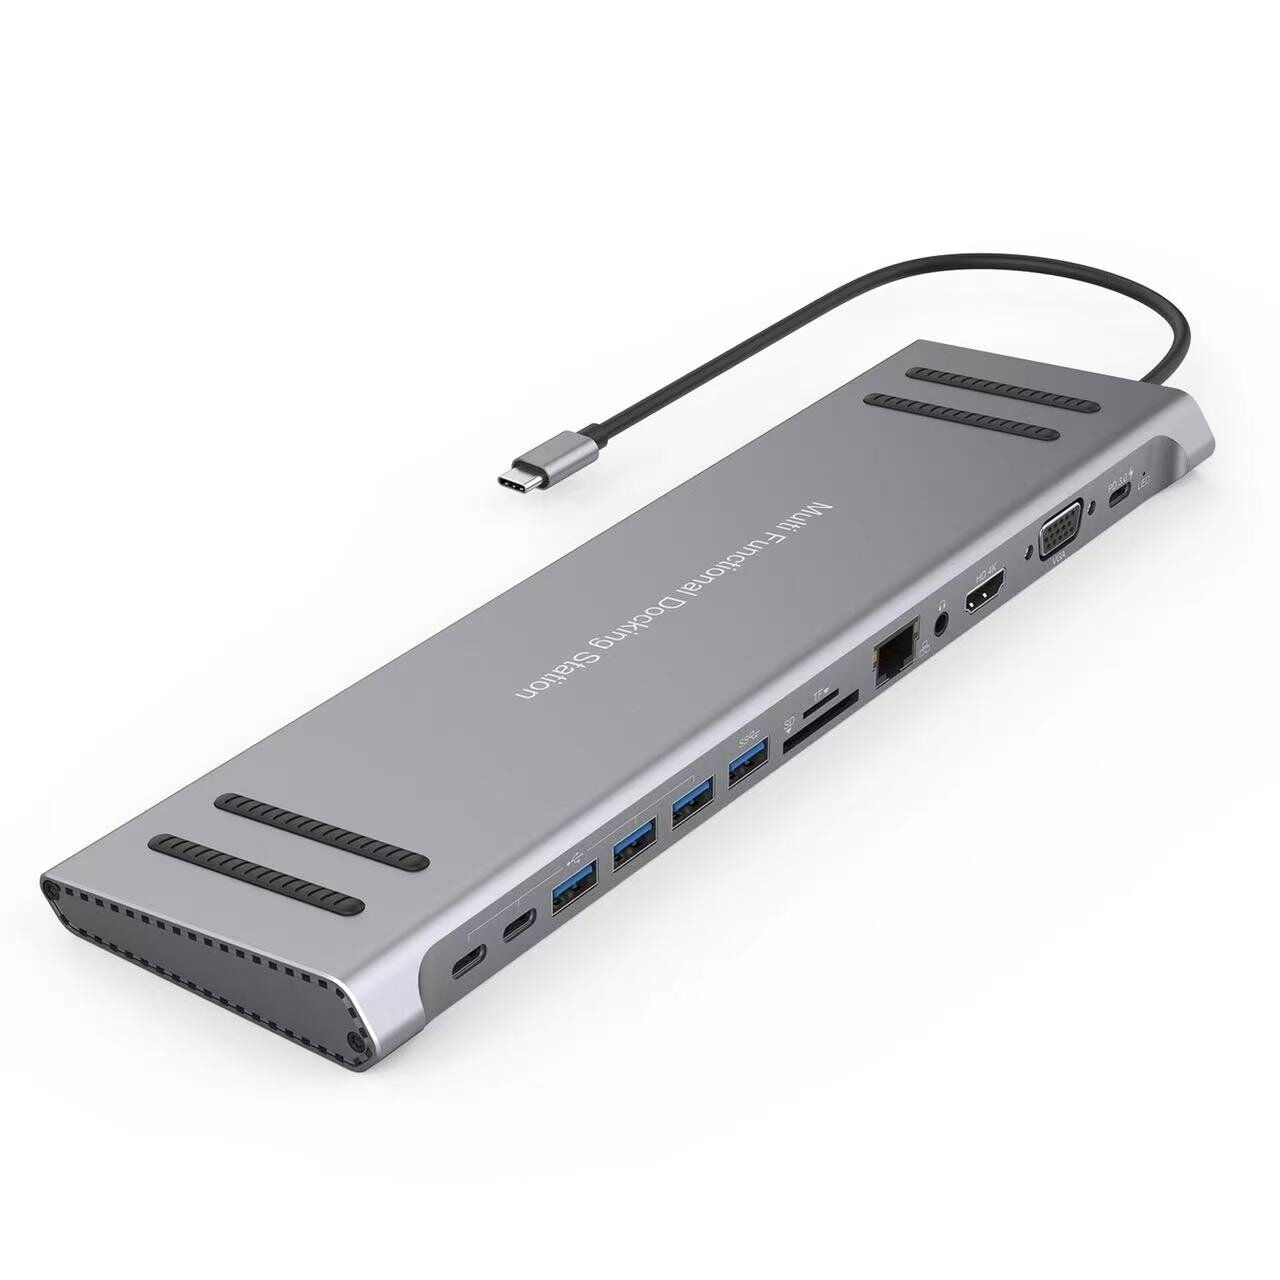 13 in 1 USB C Docking Station Network Hub with VGA PD 3.0 USB-C RJ45 10/100Mbps Laptop Stand for MacBook iPad Surface pro COD